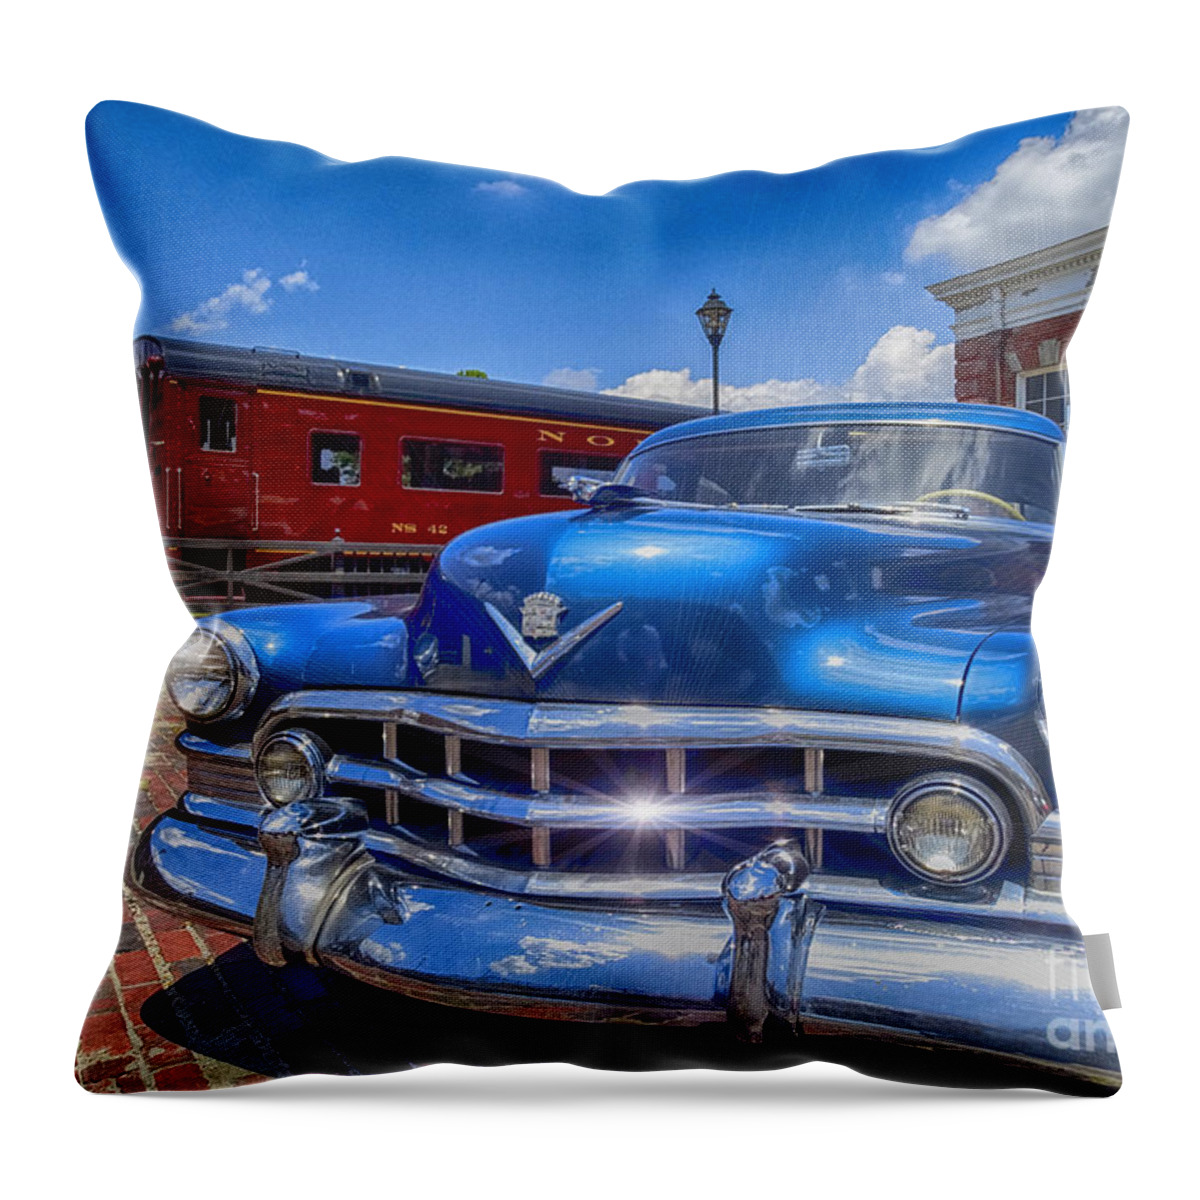 Photoshop Throw Pillow featuring the digital art Vintage Blue Cadillac by Melissa Messick